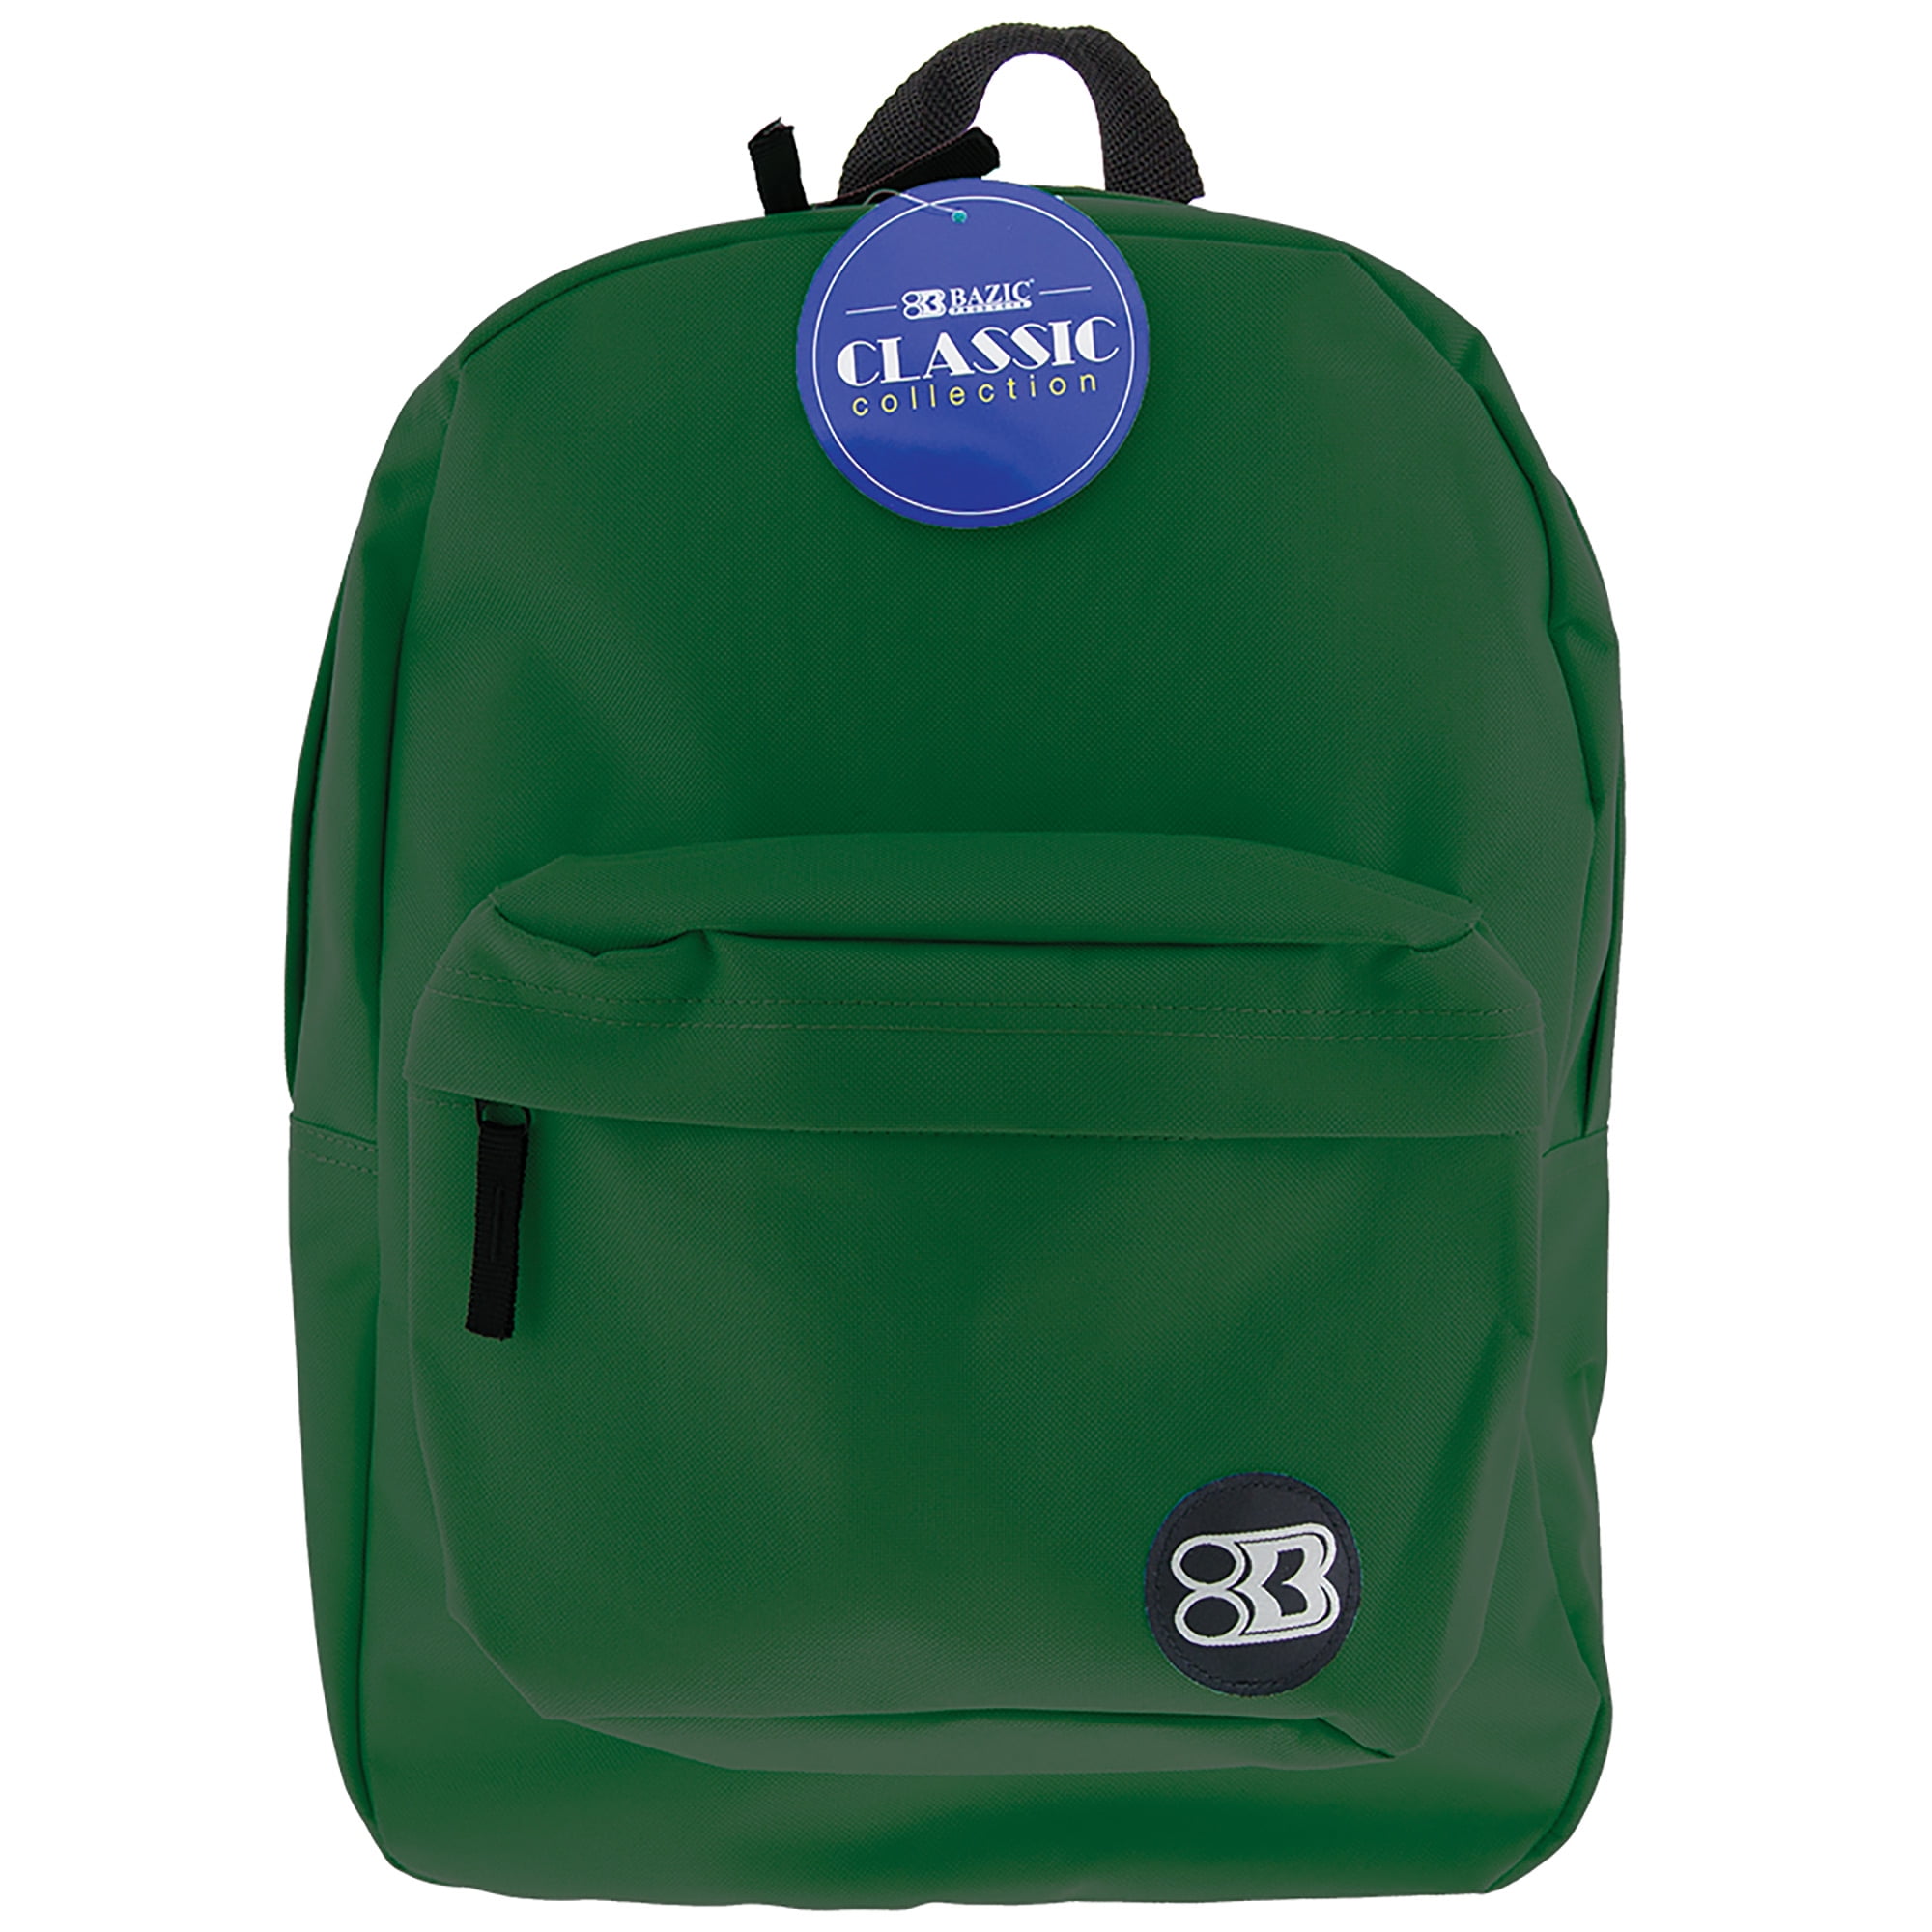 Bazic 2288309 17 In. Green Classic Backpack - Pack Of 12